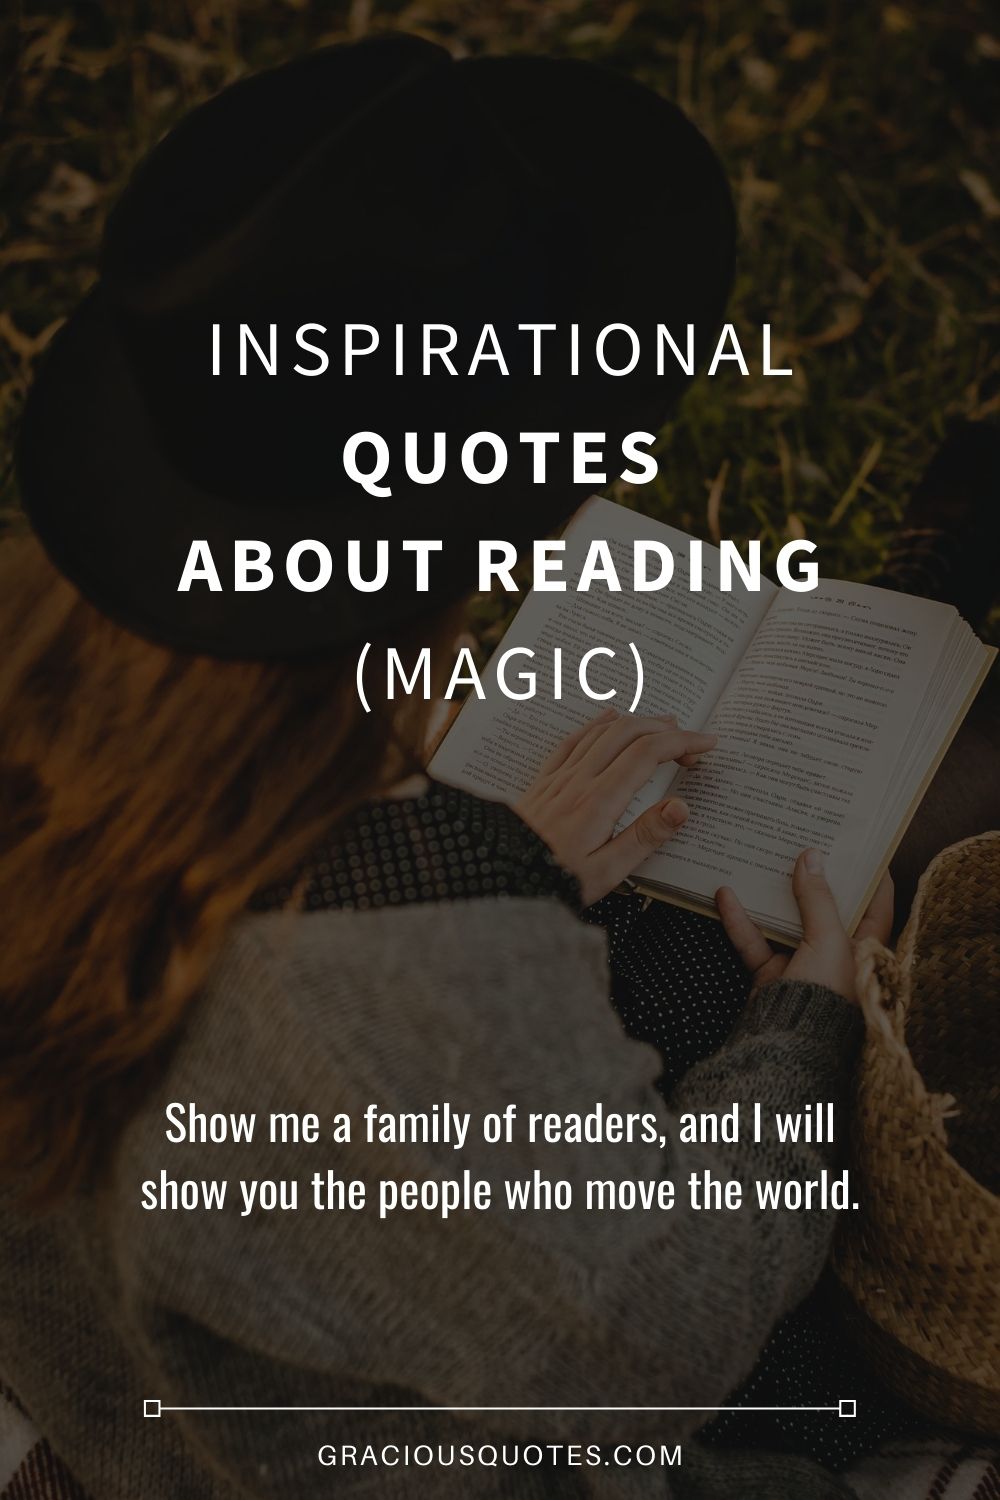 Inspirational Quotes About Reading (MAGIC) - Gracious Quotes